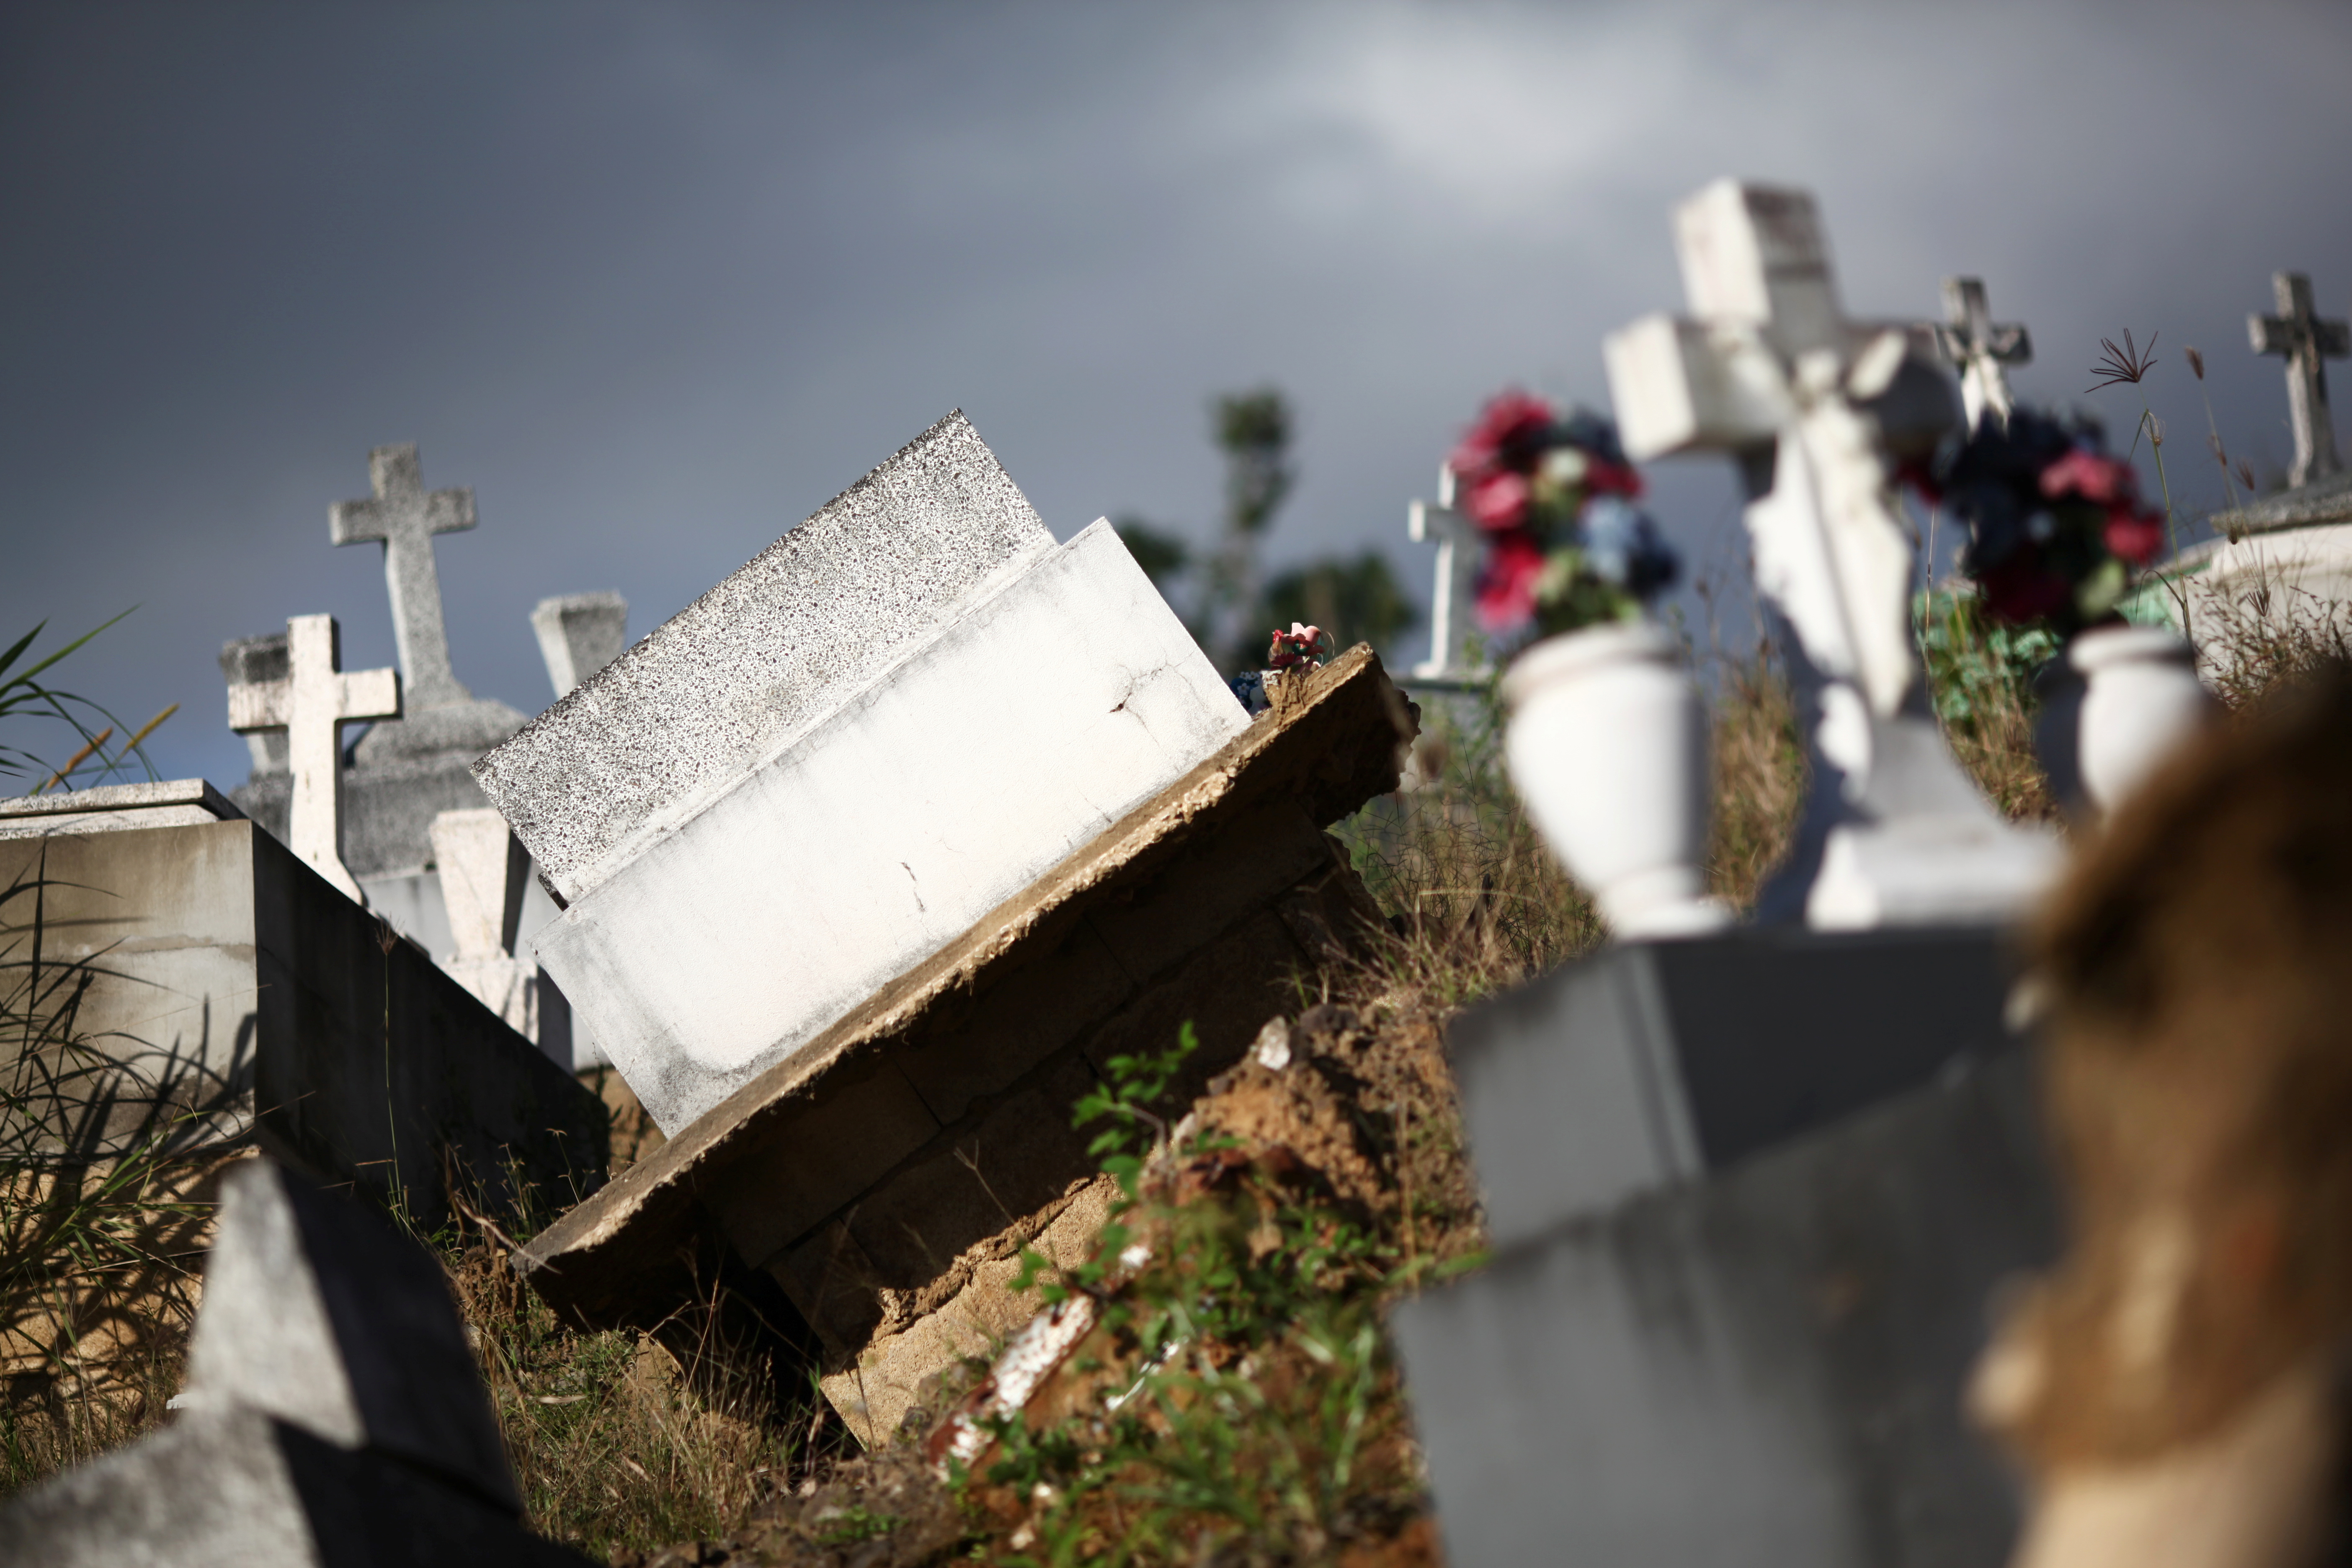 Graves destroyed during Hurricane Maria in September 2017, are seen at a cemetery, in Lares, Puerto Rico February 8, 2018. Picture taken February 8, 2018. REUTERS/Alvin Baez